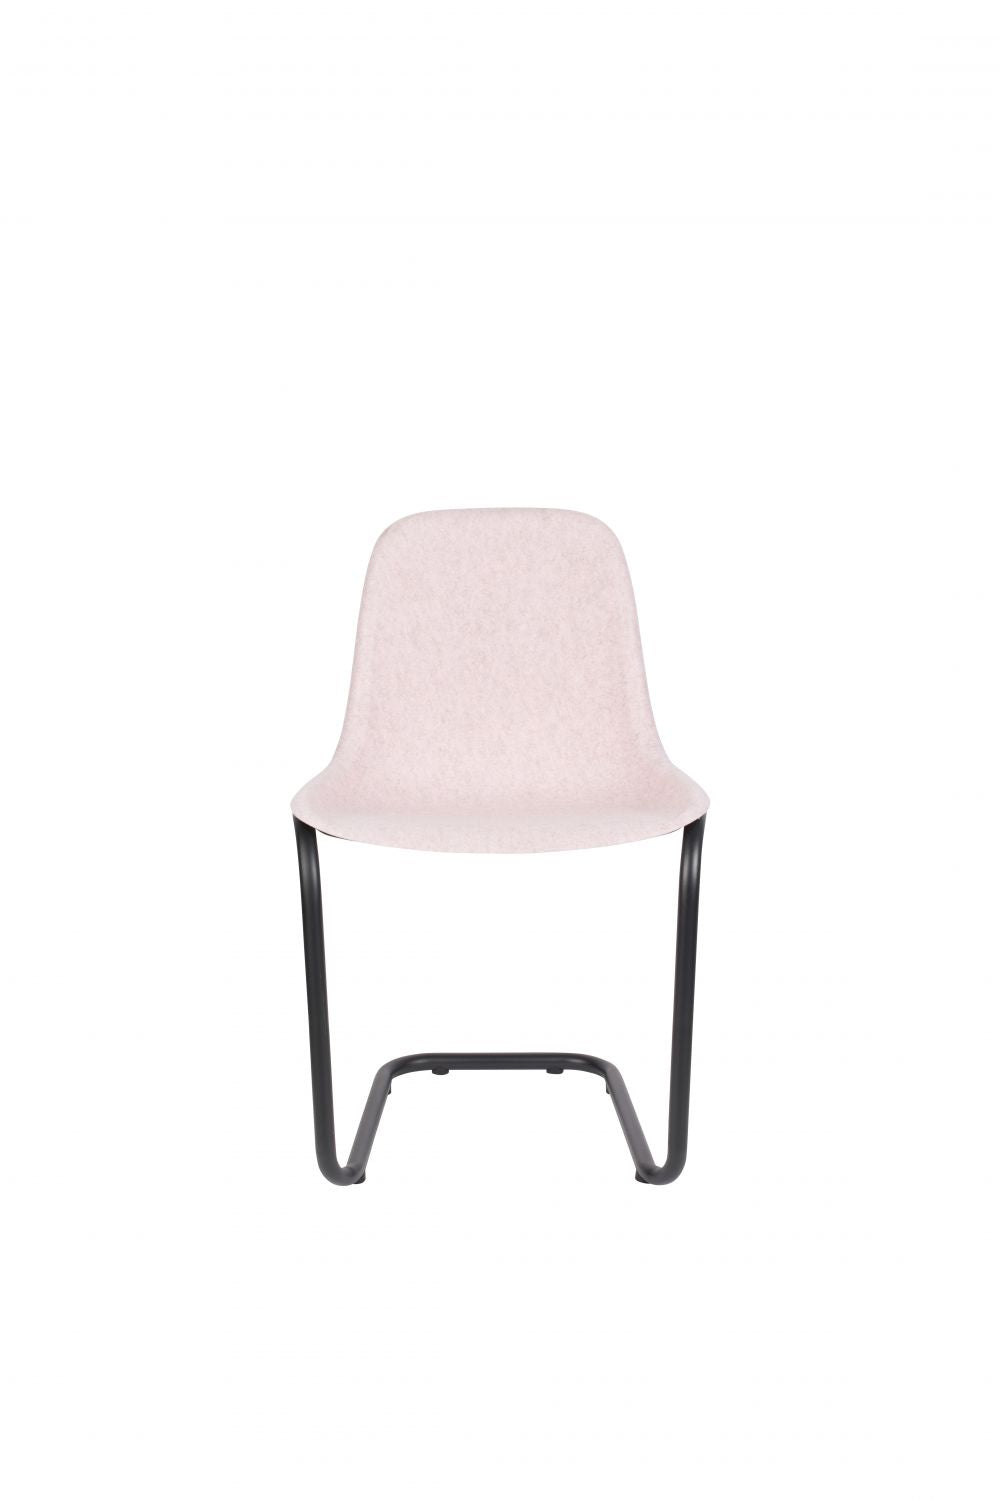 Zuiver Set of 2 Thirsty Dining Chairs in Soft Pink